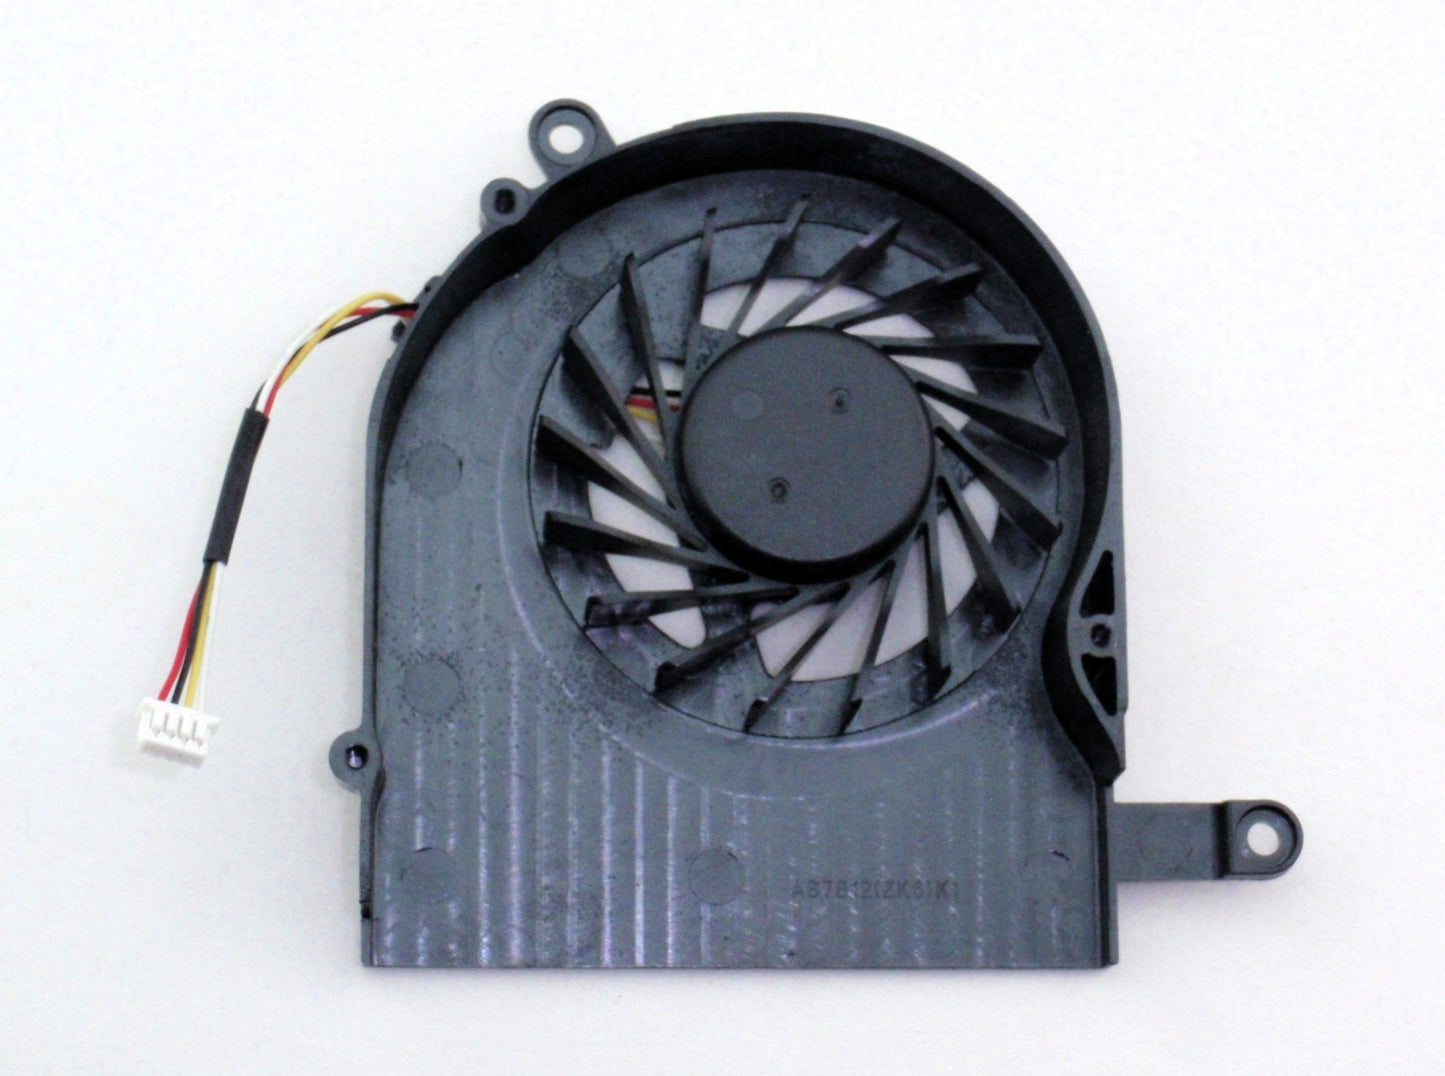 Acer New CPU Thermal Cooling Fan Aspire 5739 5739G MG55100V1-Q040-S99 60.PDP07.002 AB7805HX-EBB